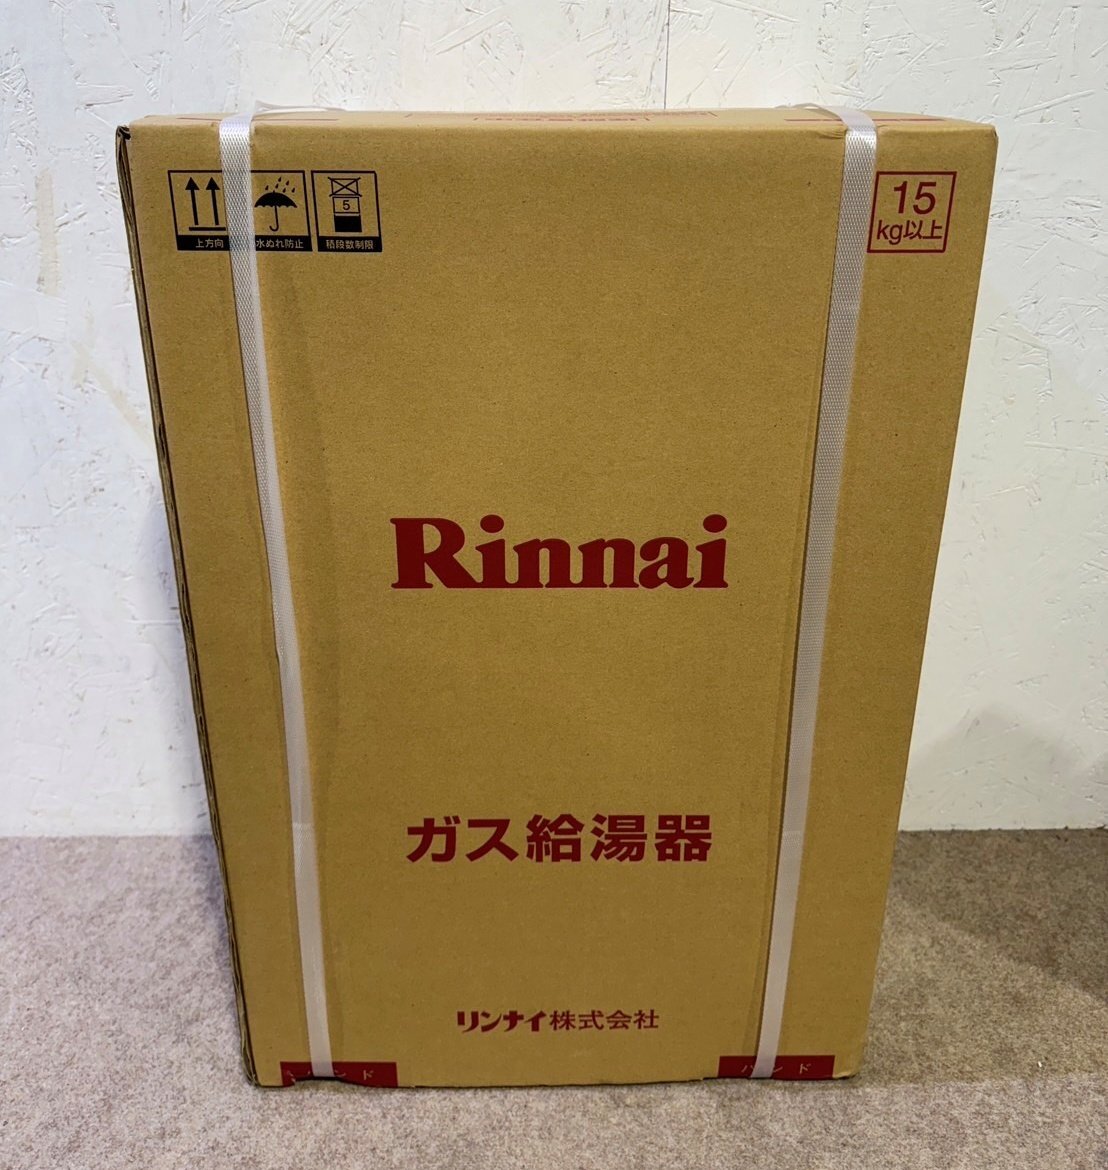  new goods unused Rinnai/ Rinnai gas water heater RUX-A1616W-E 16 number 2023 year made city gas outdoors wall hanging remote control MC-145V(A) attaching 